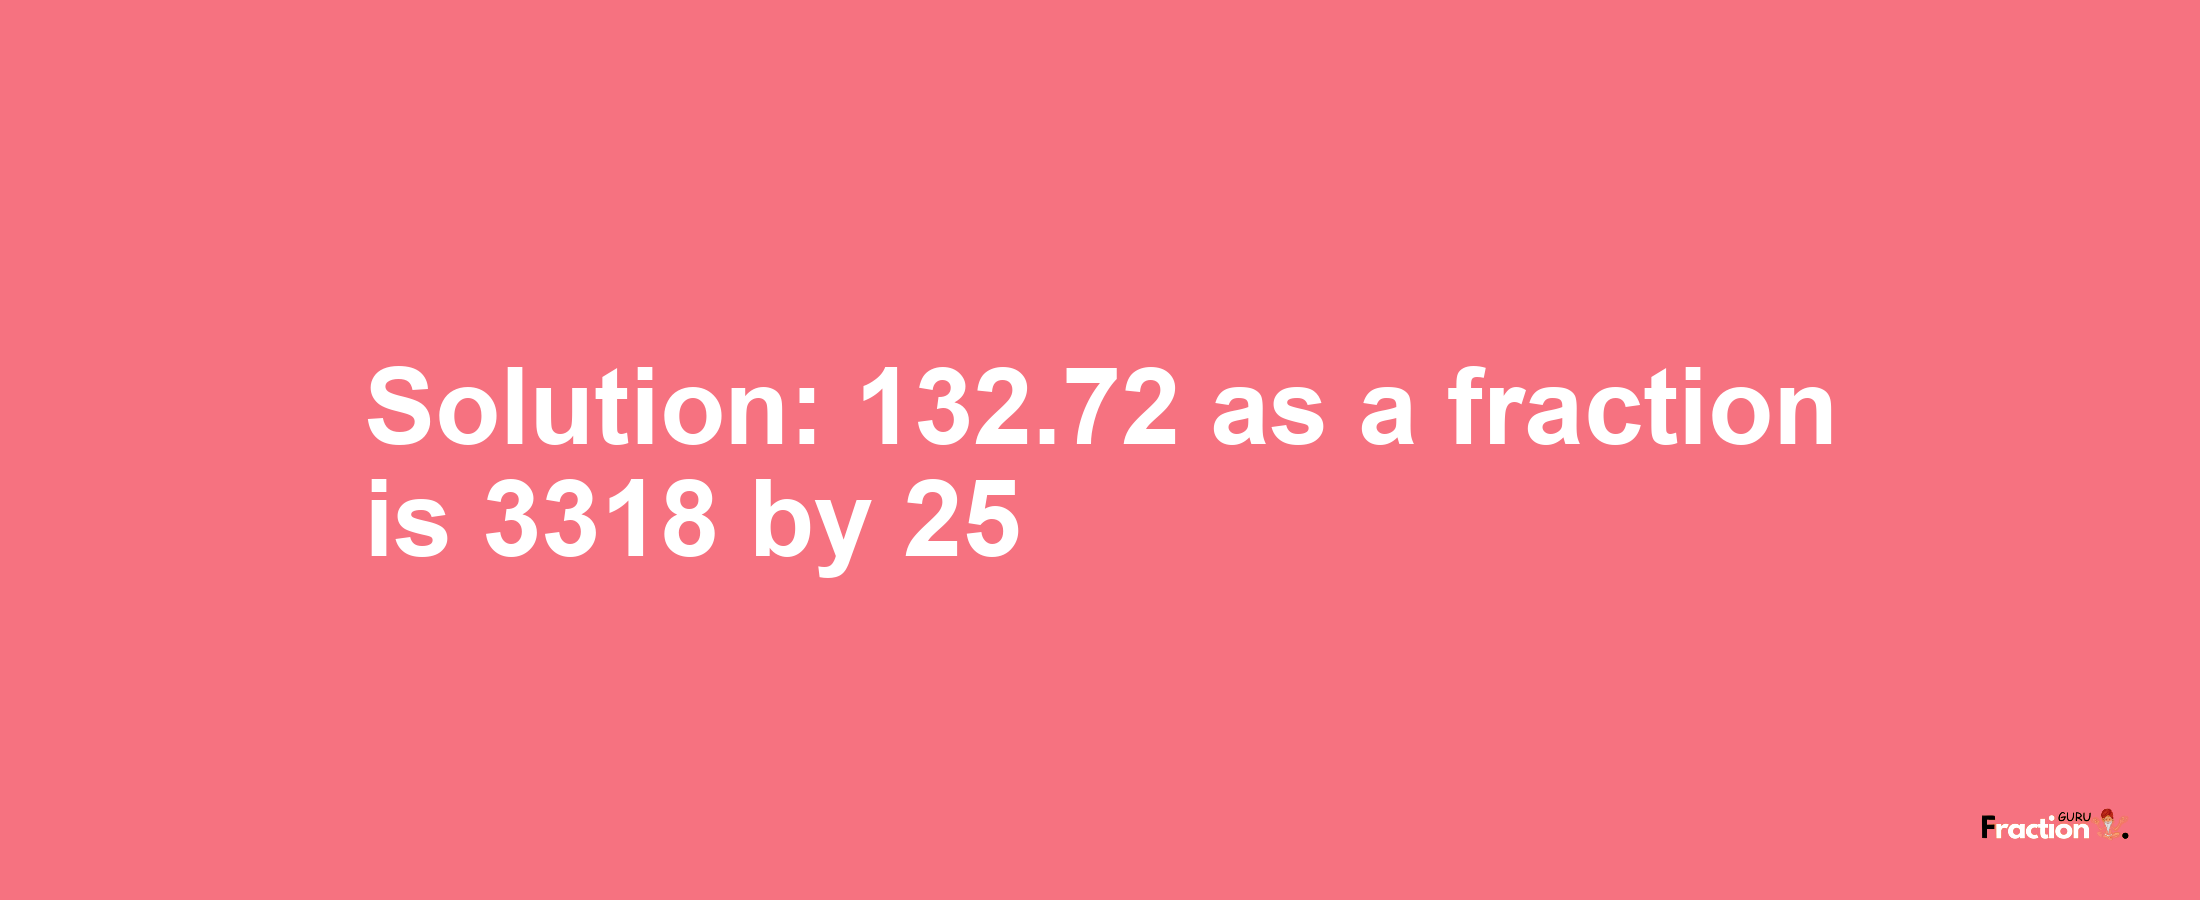 Solution:132.72 as a fraction is 3318/25